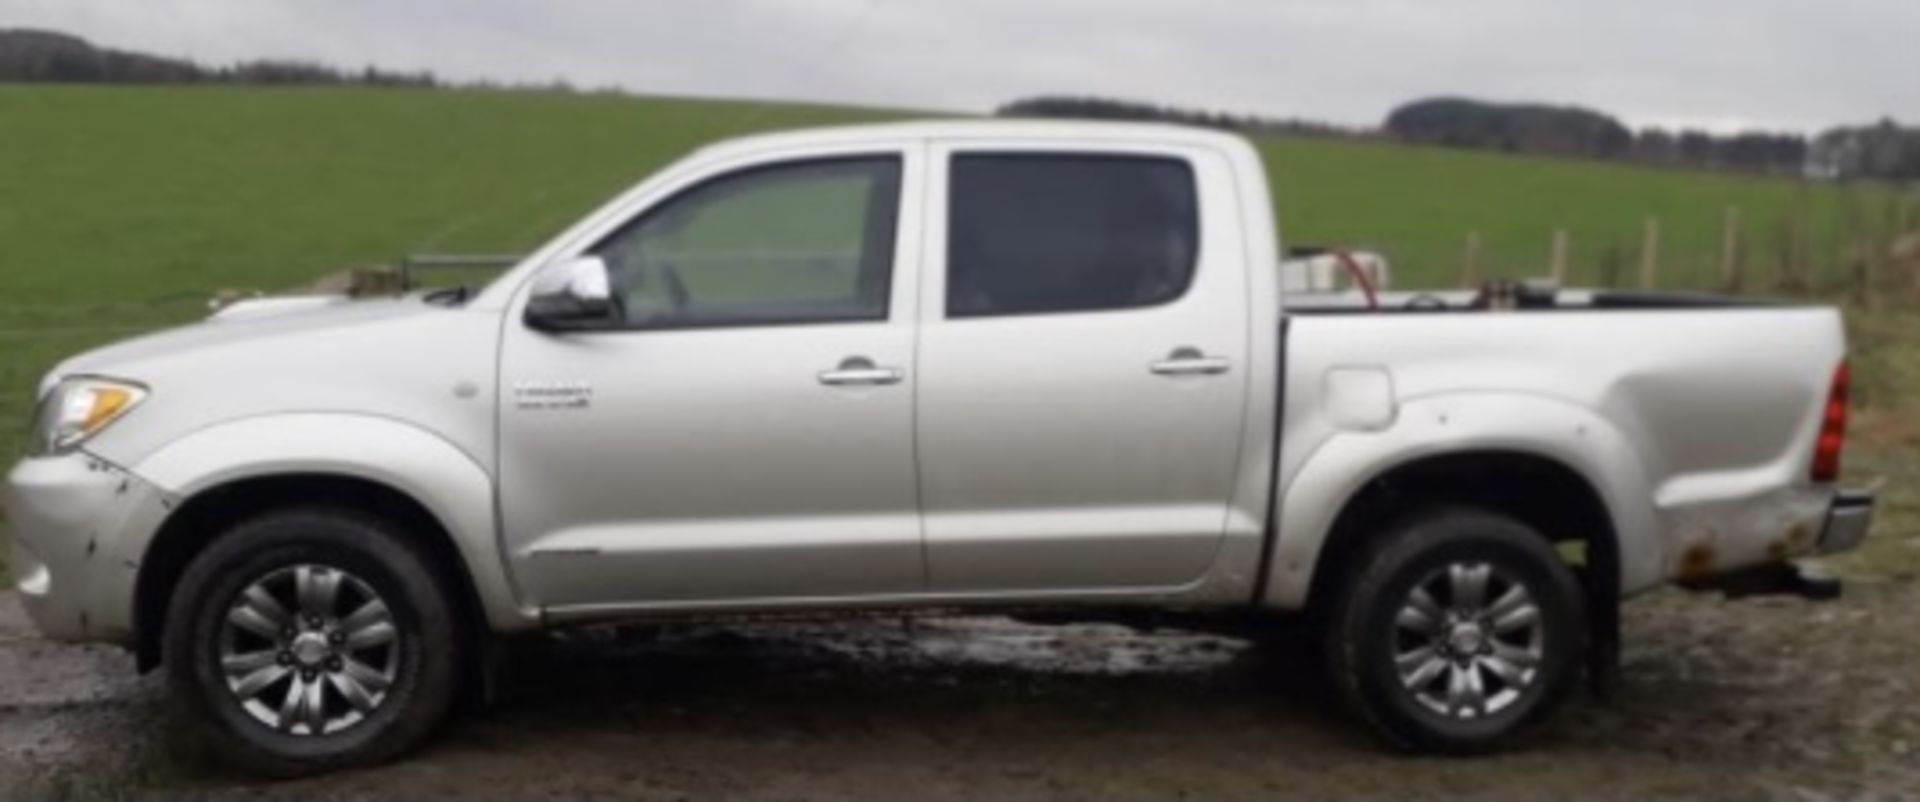 TOYOTA HILUX INVINCIBLE 2007 3.0 LITRE DIESEL LOCATION NORTHERN IRELAND.